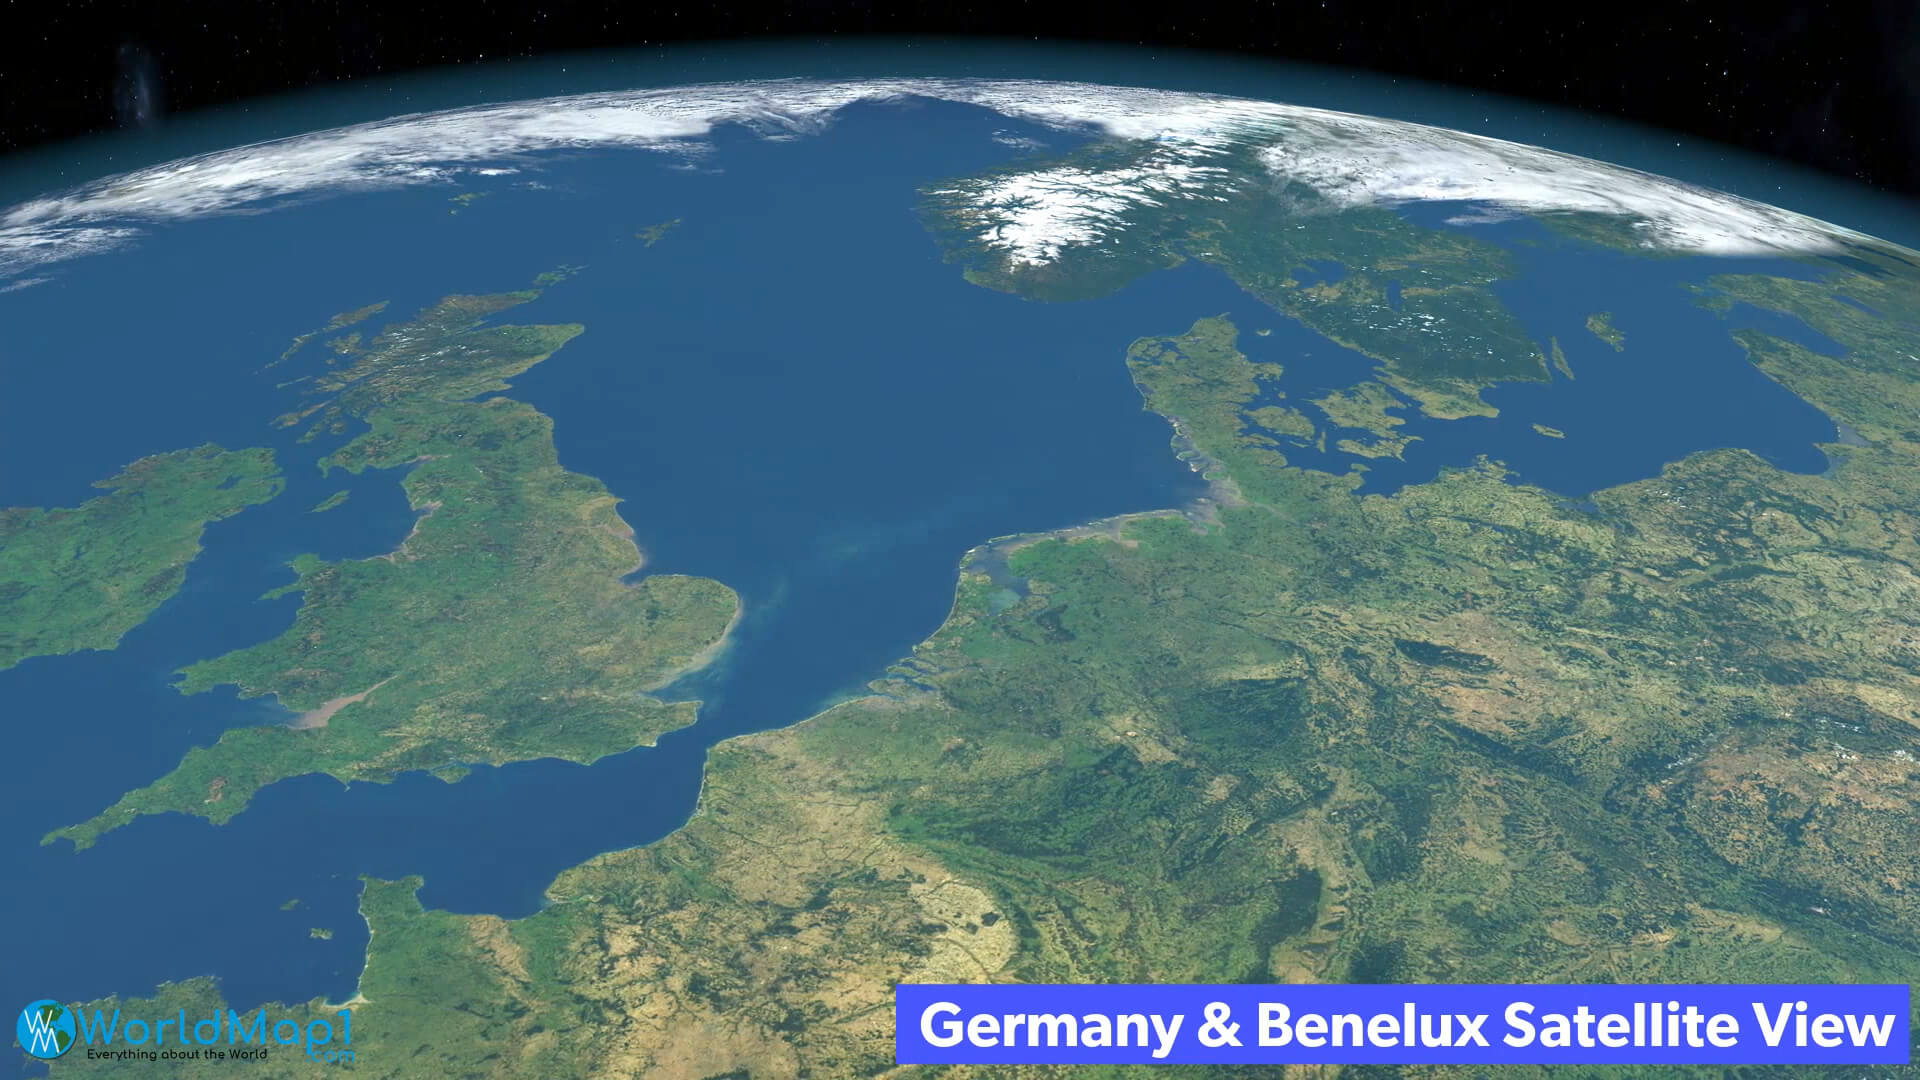 Germany and Benelux Satellite View